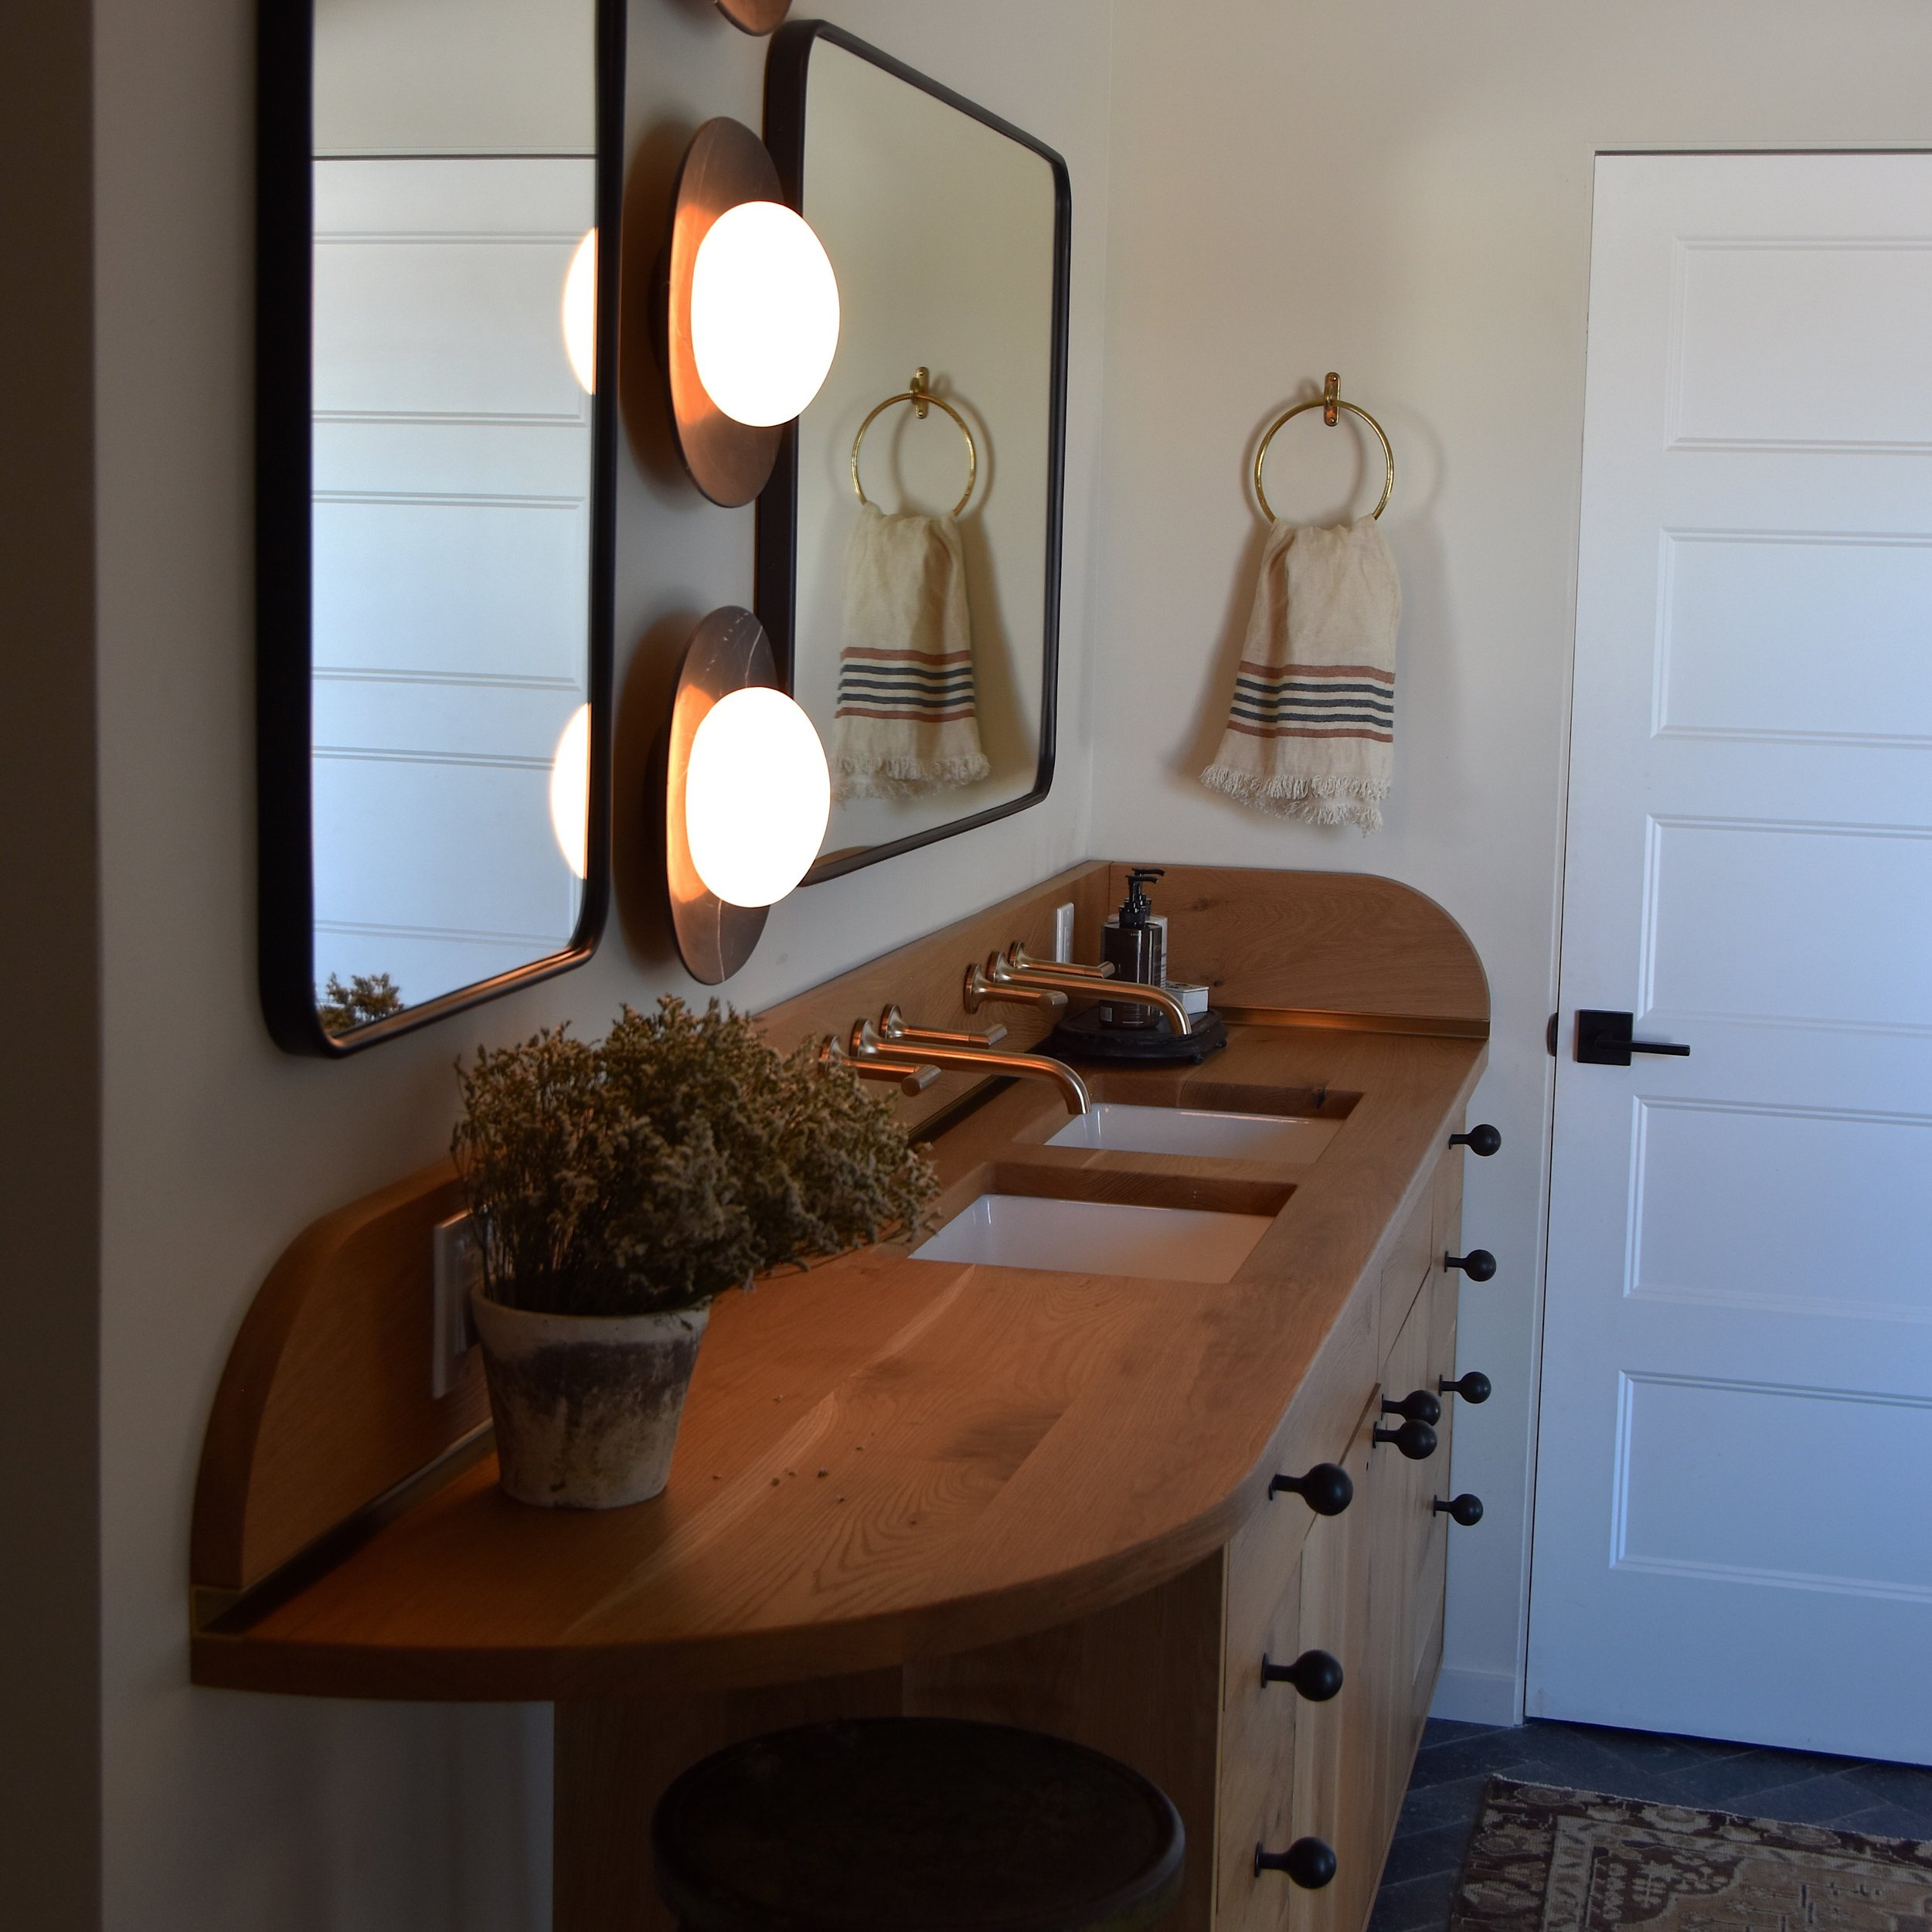 So much meets the eye at this vanity. We love the different textures, colors, and materials and the lighting that create an interesting space with an organic look. Not a bad place to get ready every morning!